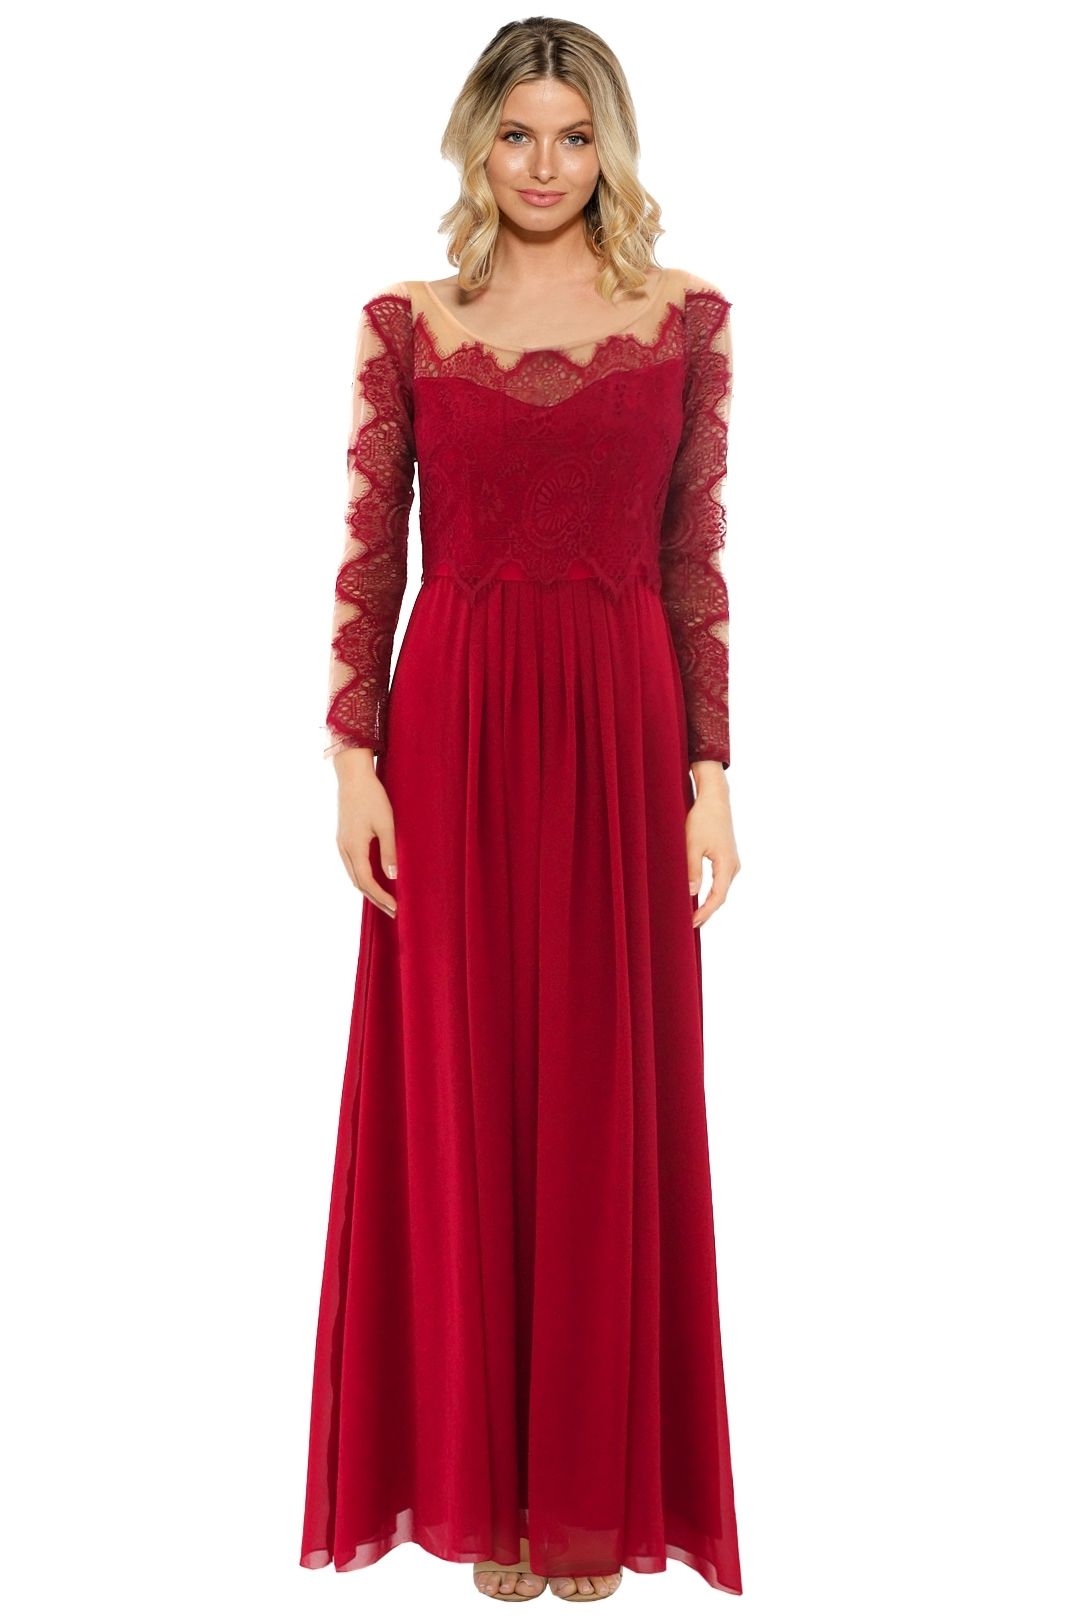 The Dress Shoppe - Gone With The Edge Gown - Red - Front